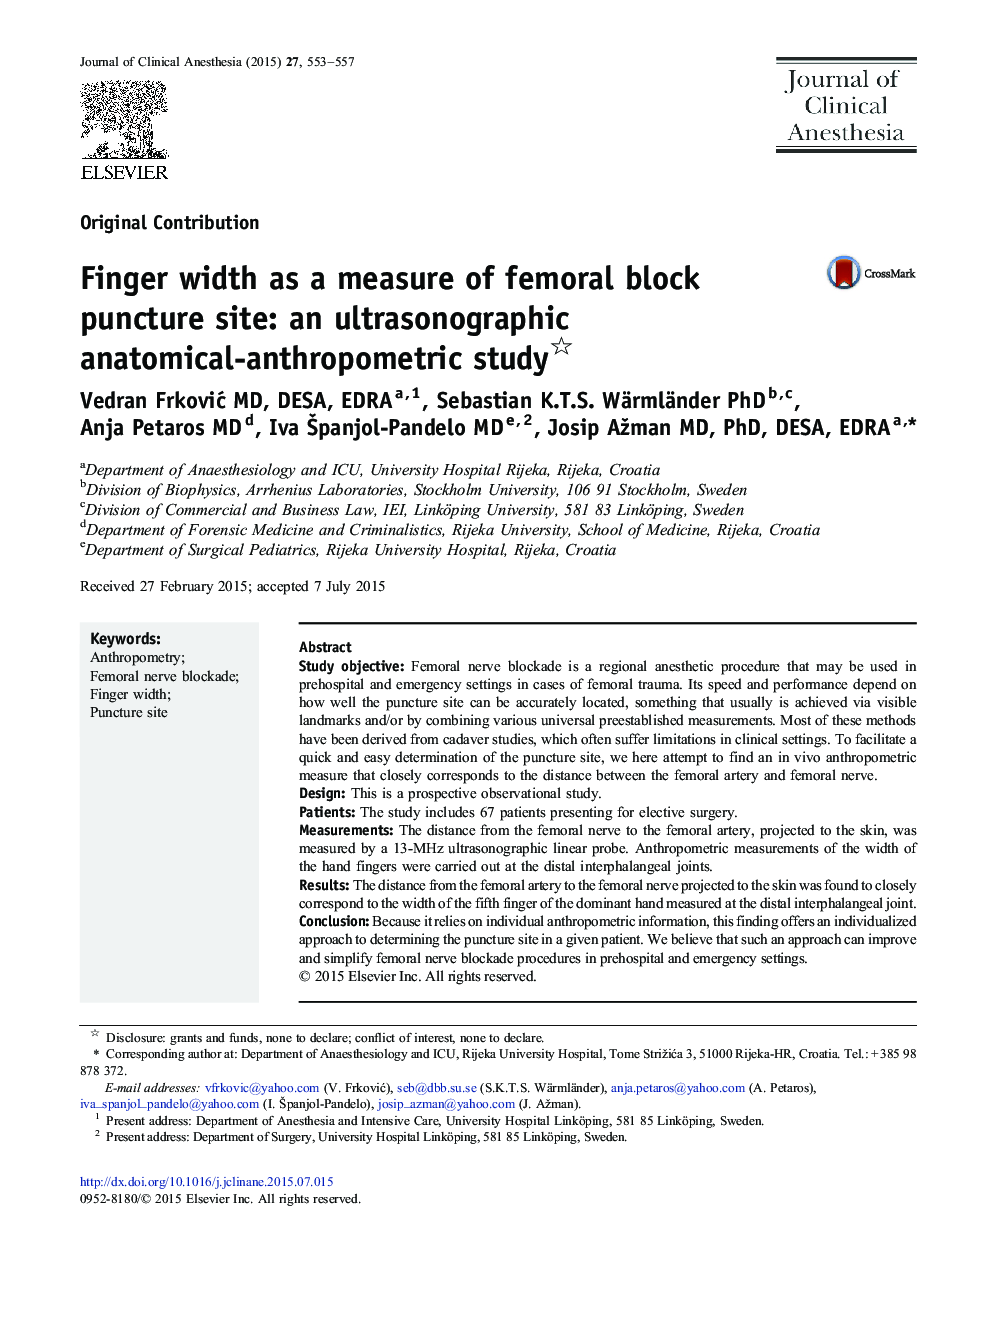 Finger width as a measure of femoral block puncture site: an ultrasonographic anatomical-anthropometric study 